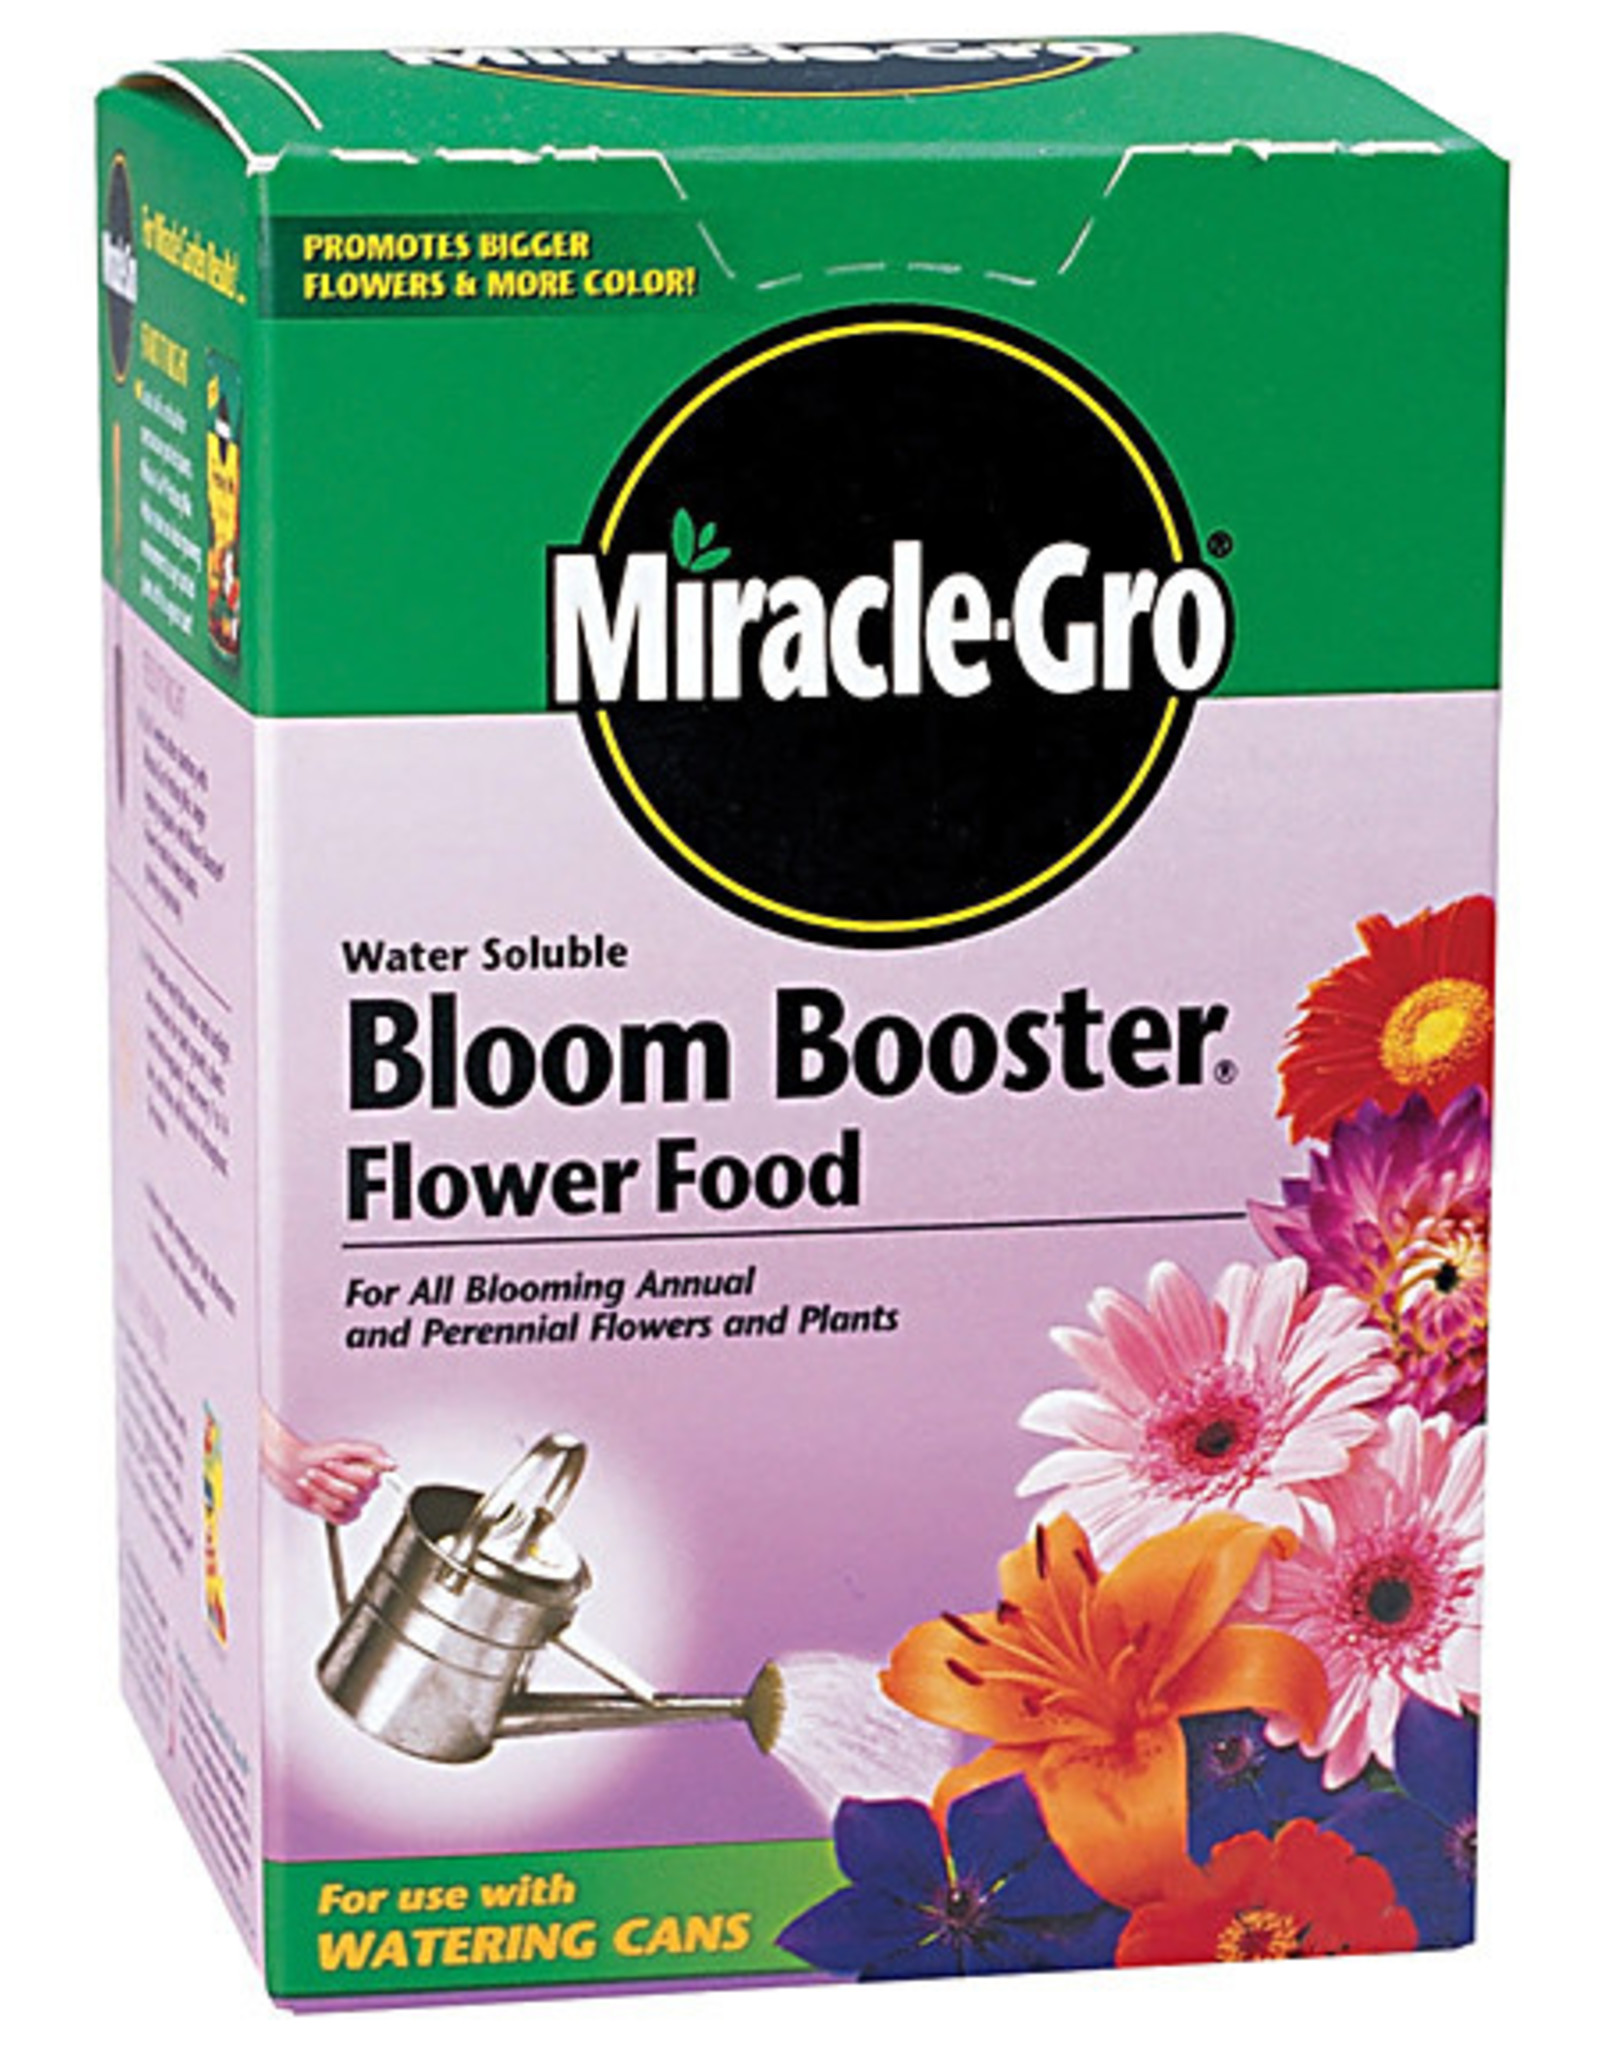 SCOTTS MIRACLE GRO PROD Miracle Gro Bloom Booster Flower Food 1.5lb